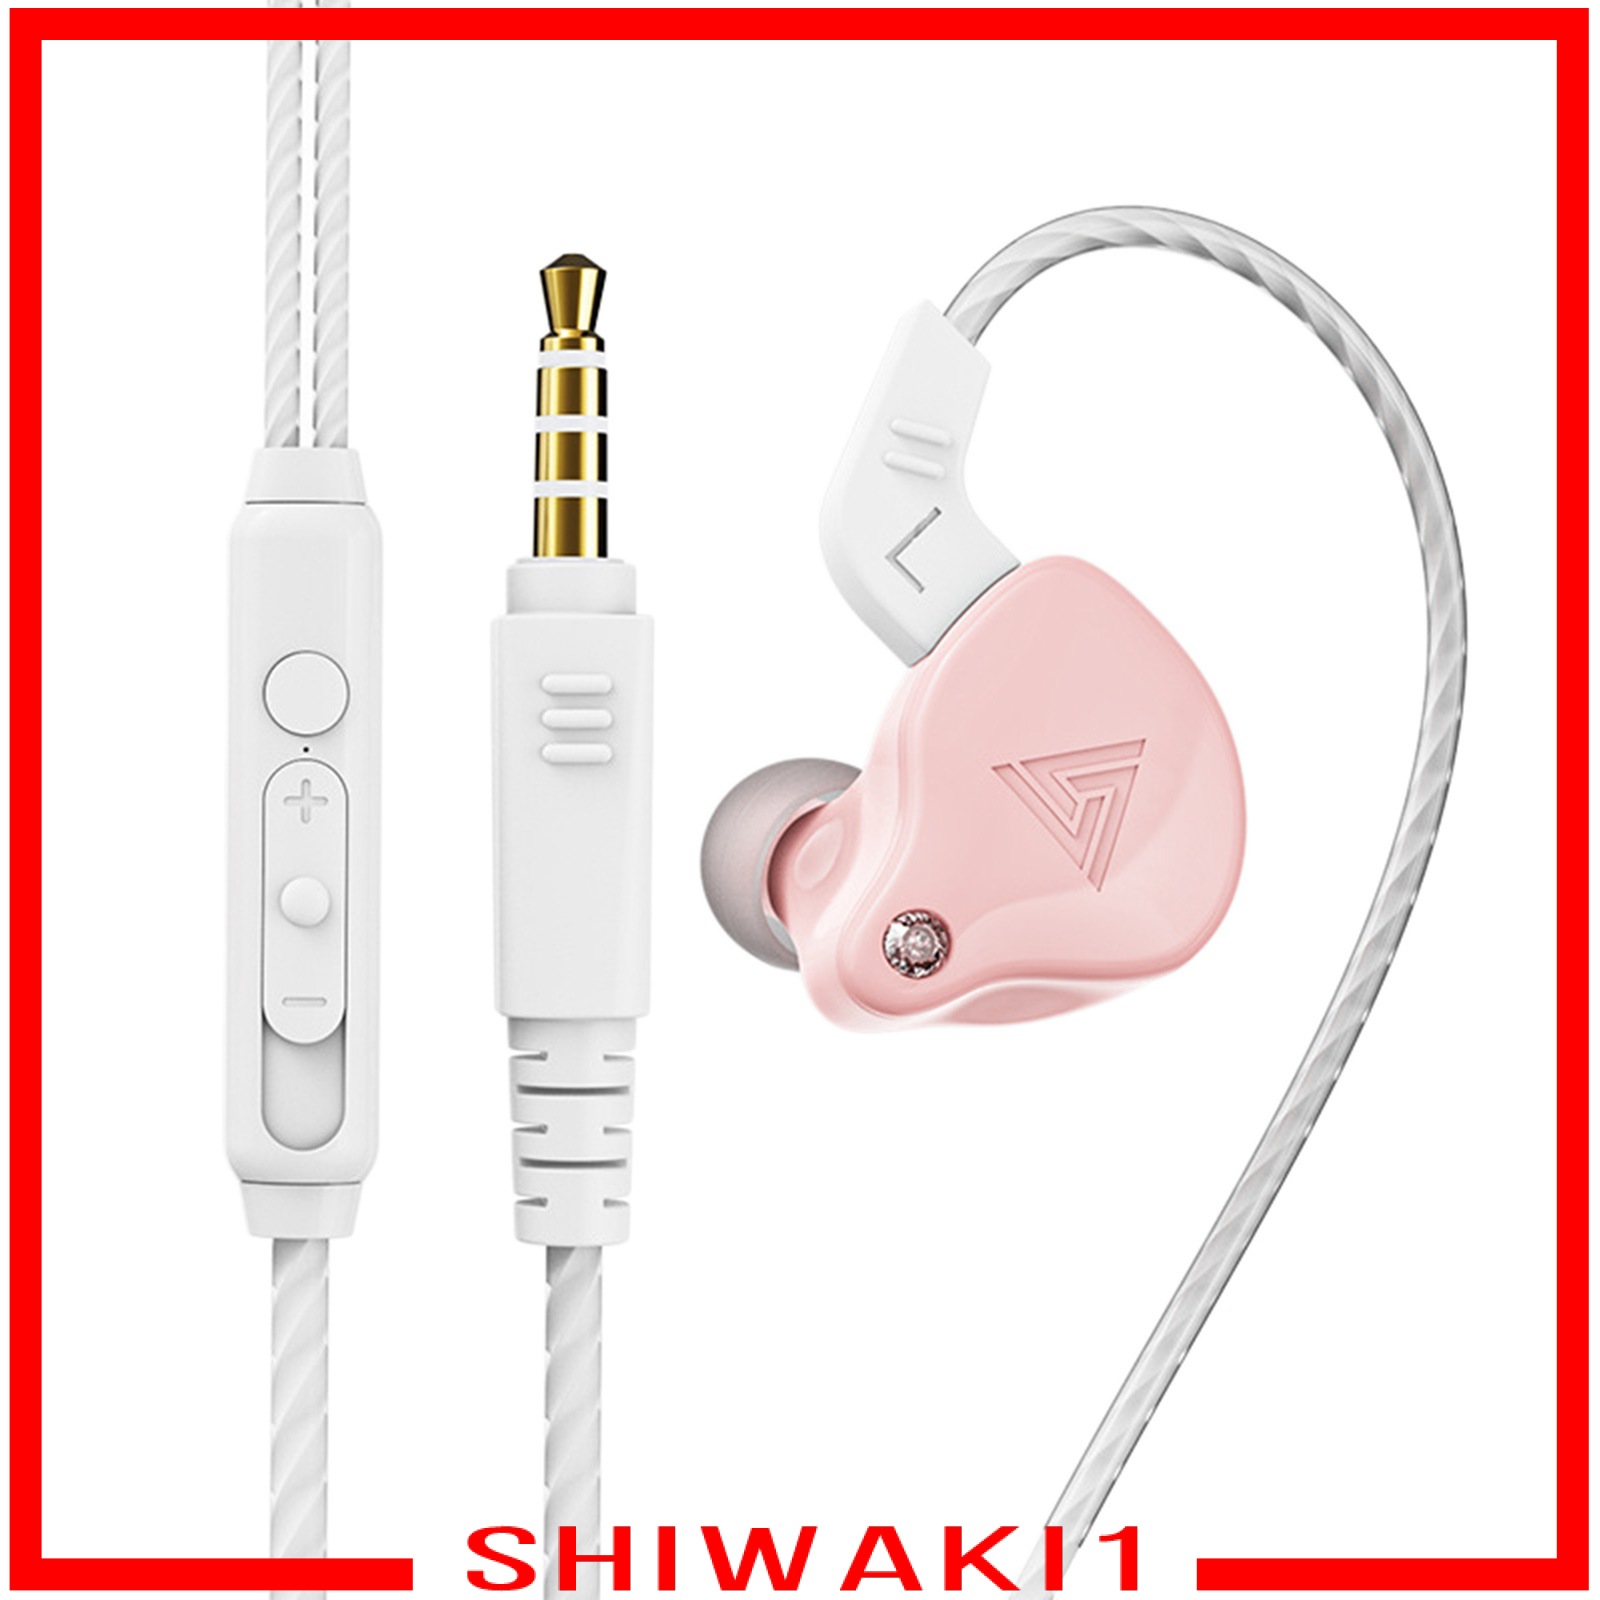 [SHIWAKI1]Earphones Wired Earbuds Enhanced HiFi Stereo Sound Noise Isolating 3.5mm Headphone in Ear with Microphone Clearer Calls, Lightweight